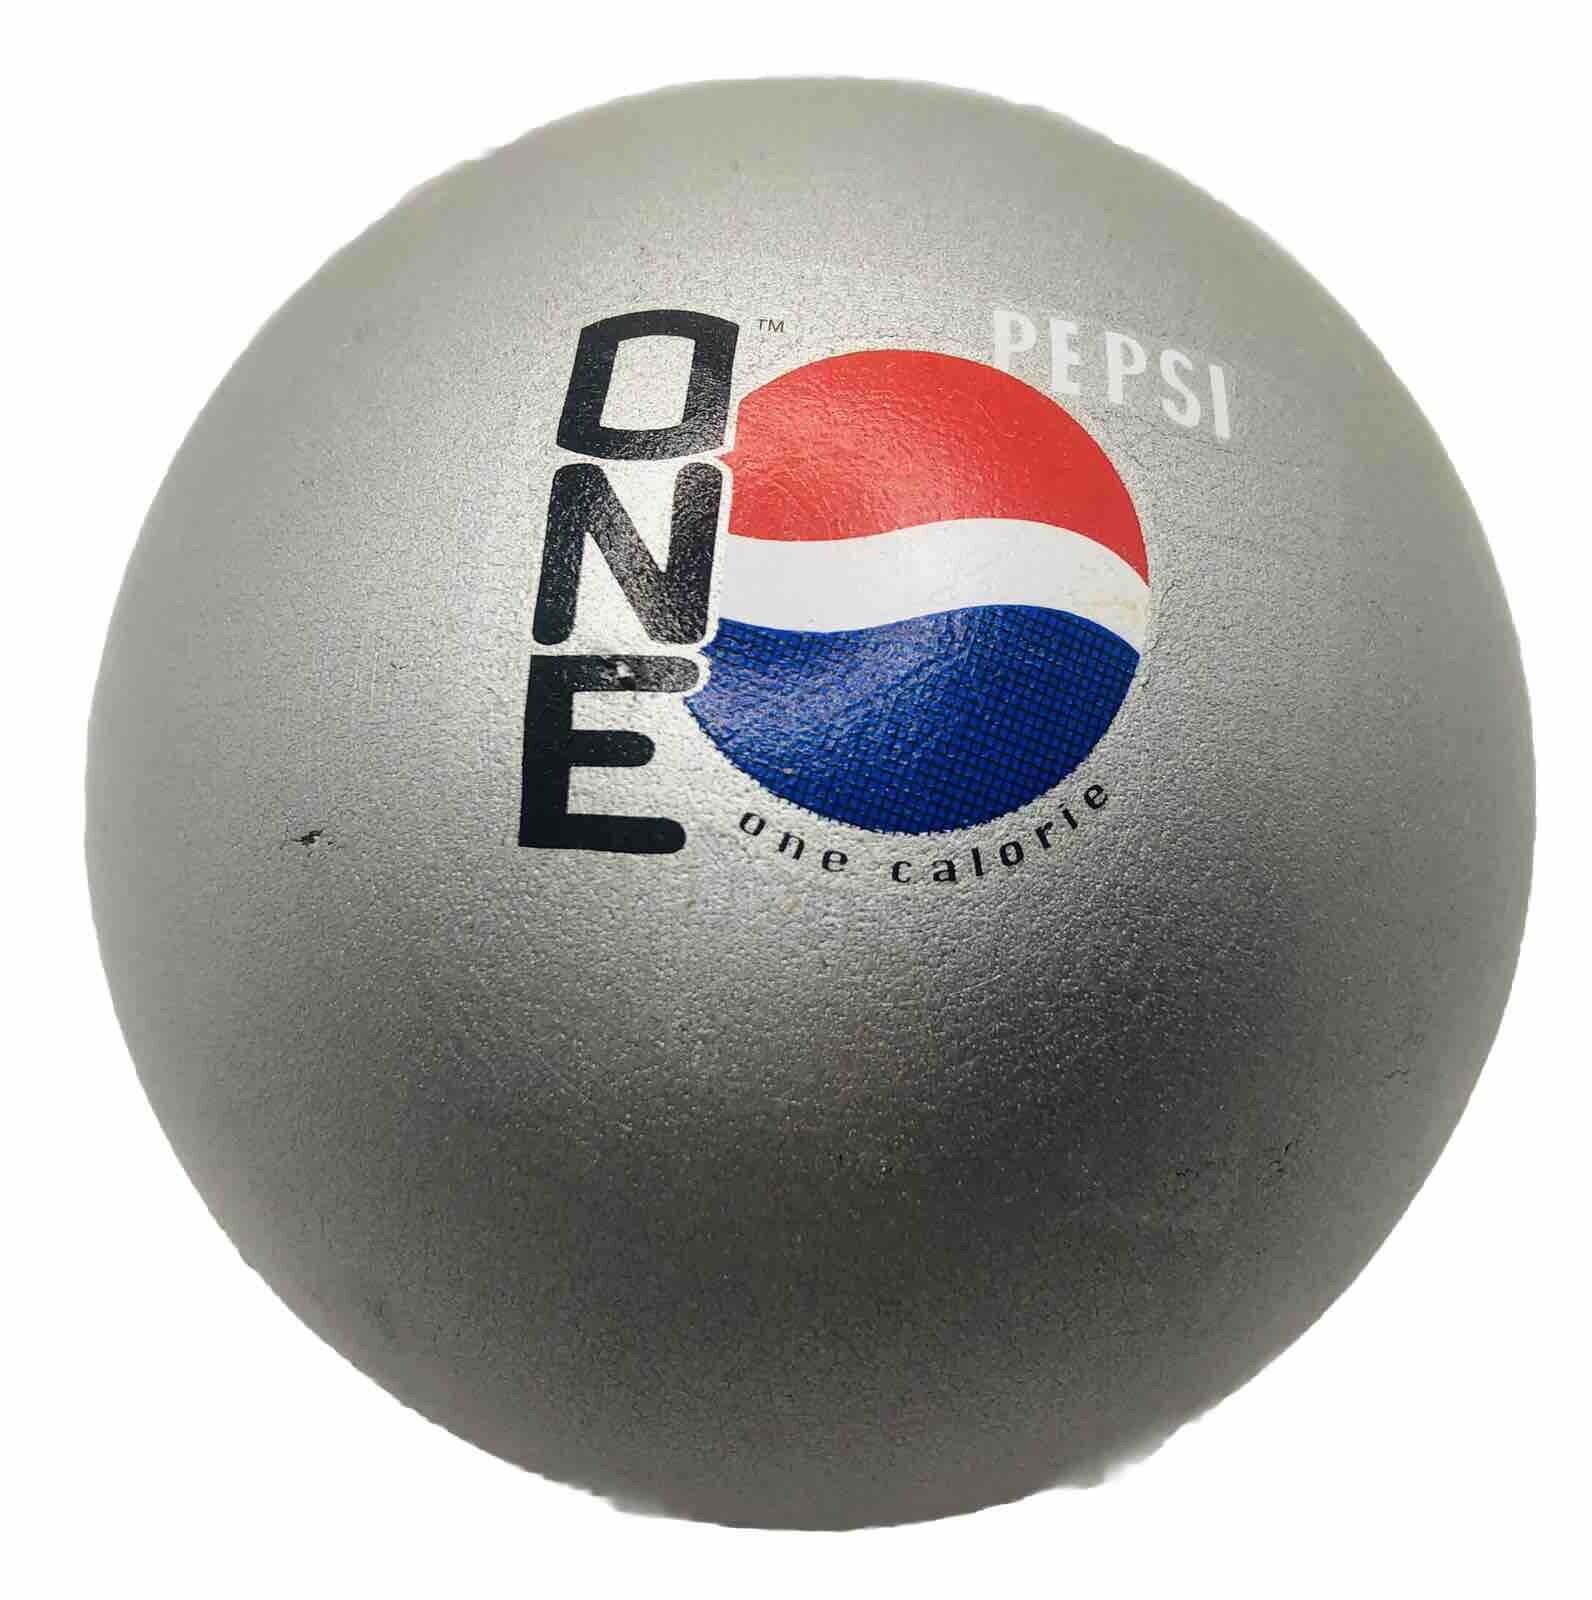 Vintage Pepsi One Calorie Promotional Squeeze Stress Foam Ball Old Cola Logo